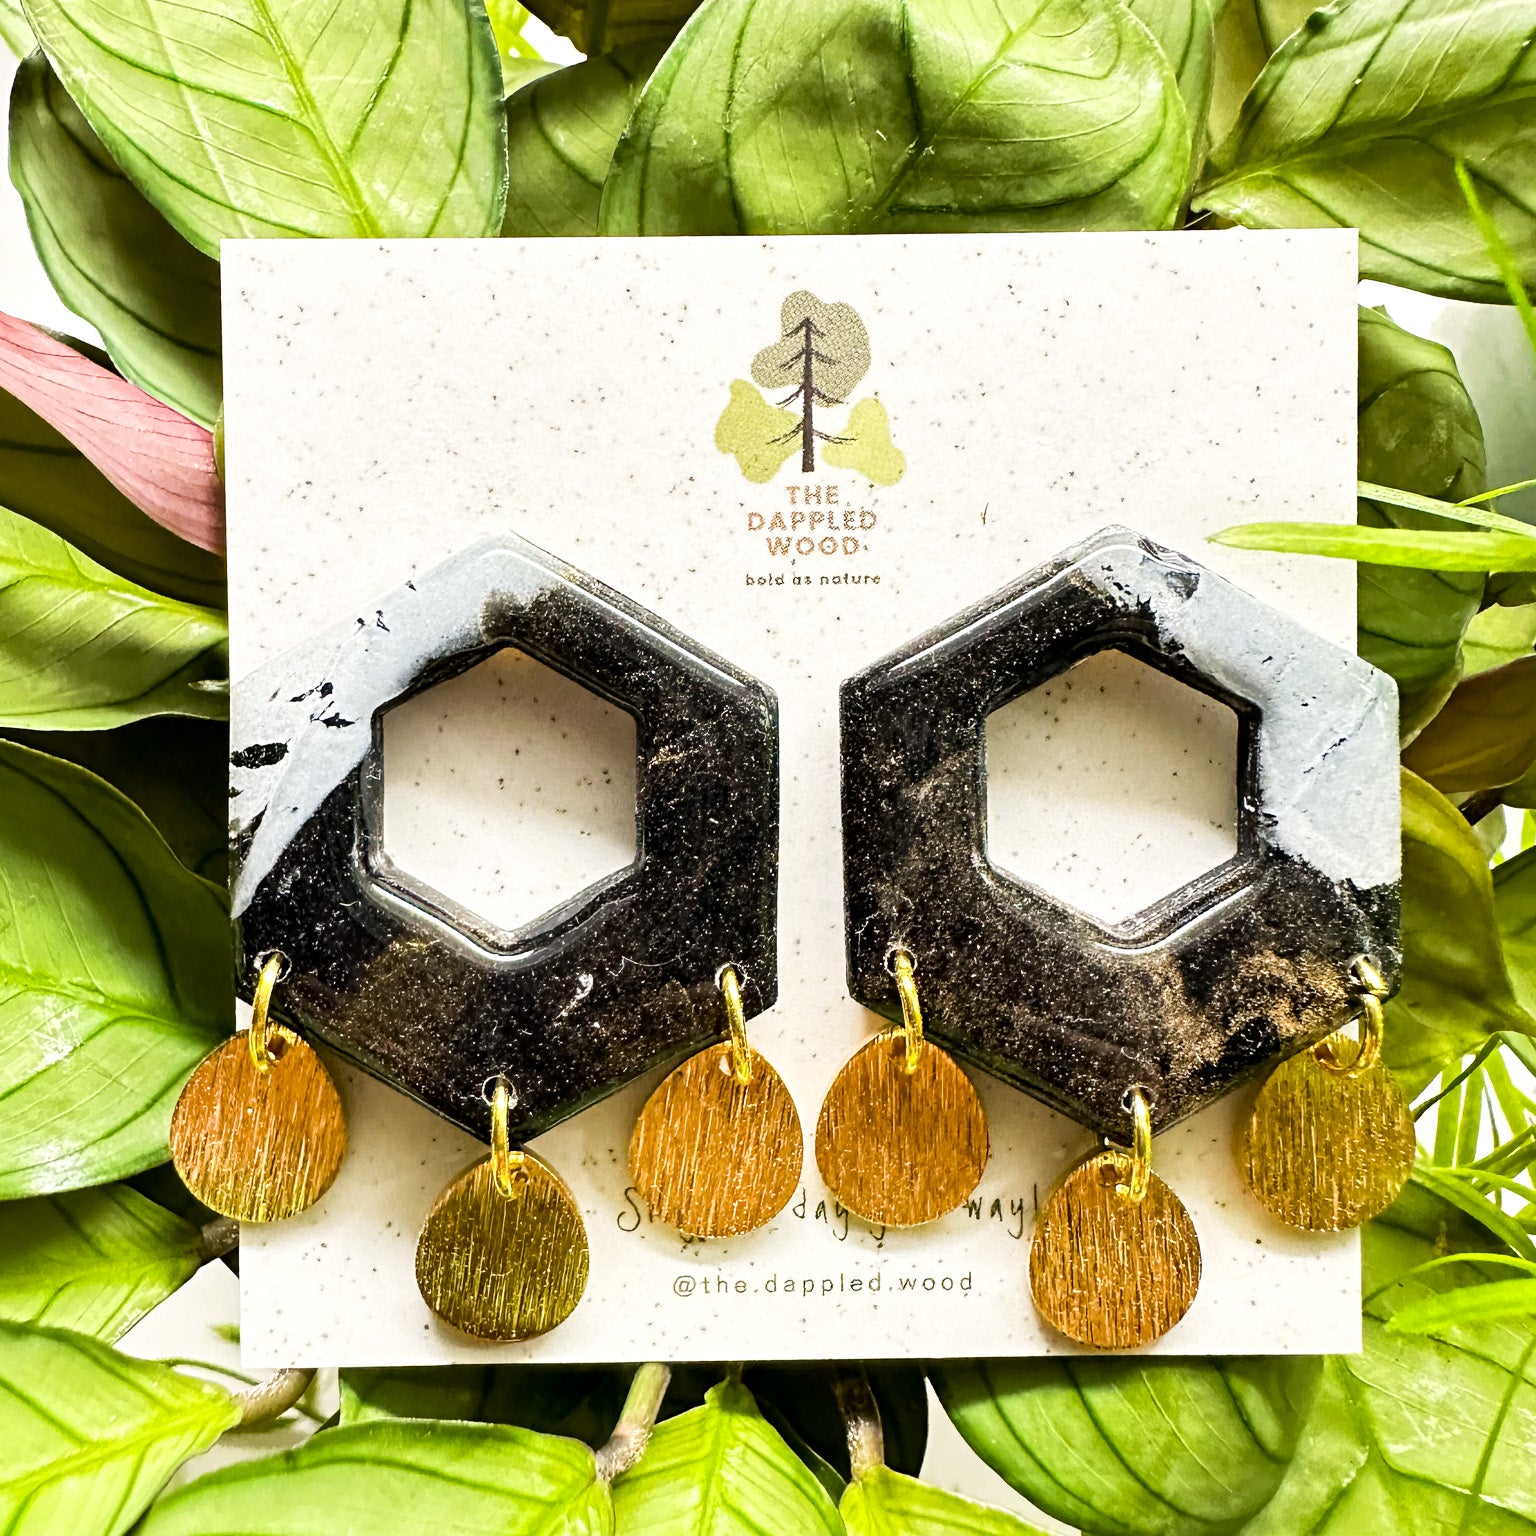 Black and glittered hexagonal-shaped polymer clay earrings complemented with small round gold textured dangles, displayed on a white card surrounded by vibrant green leaves. Card features 'The Dappled Wood' logo.